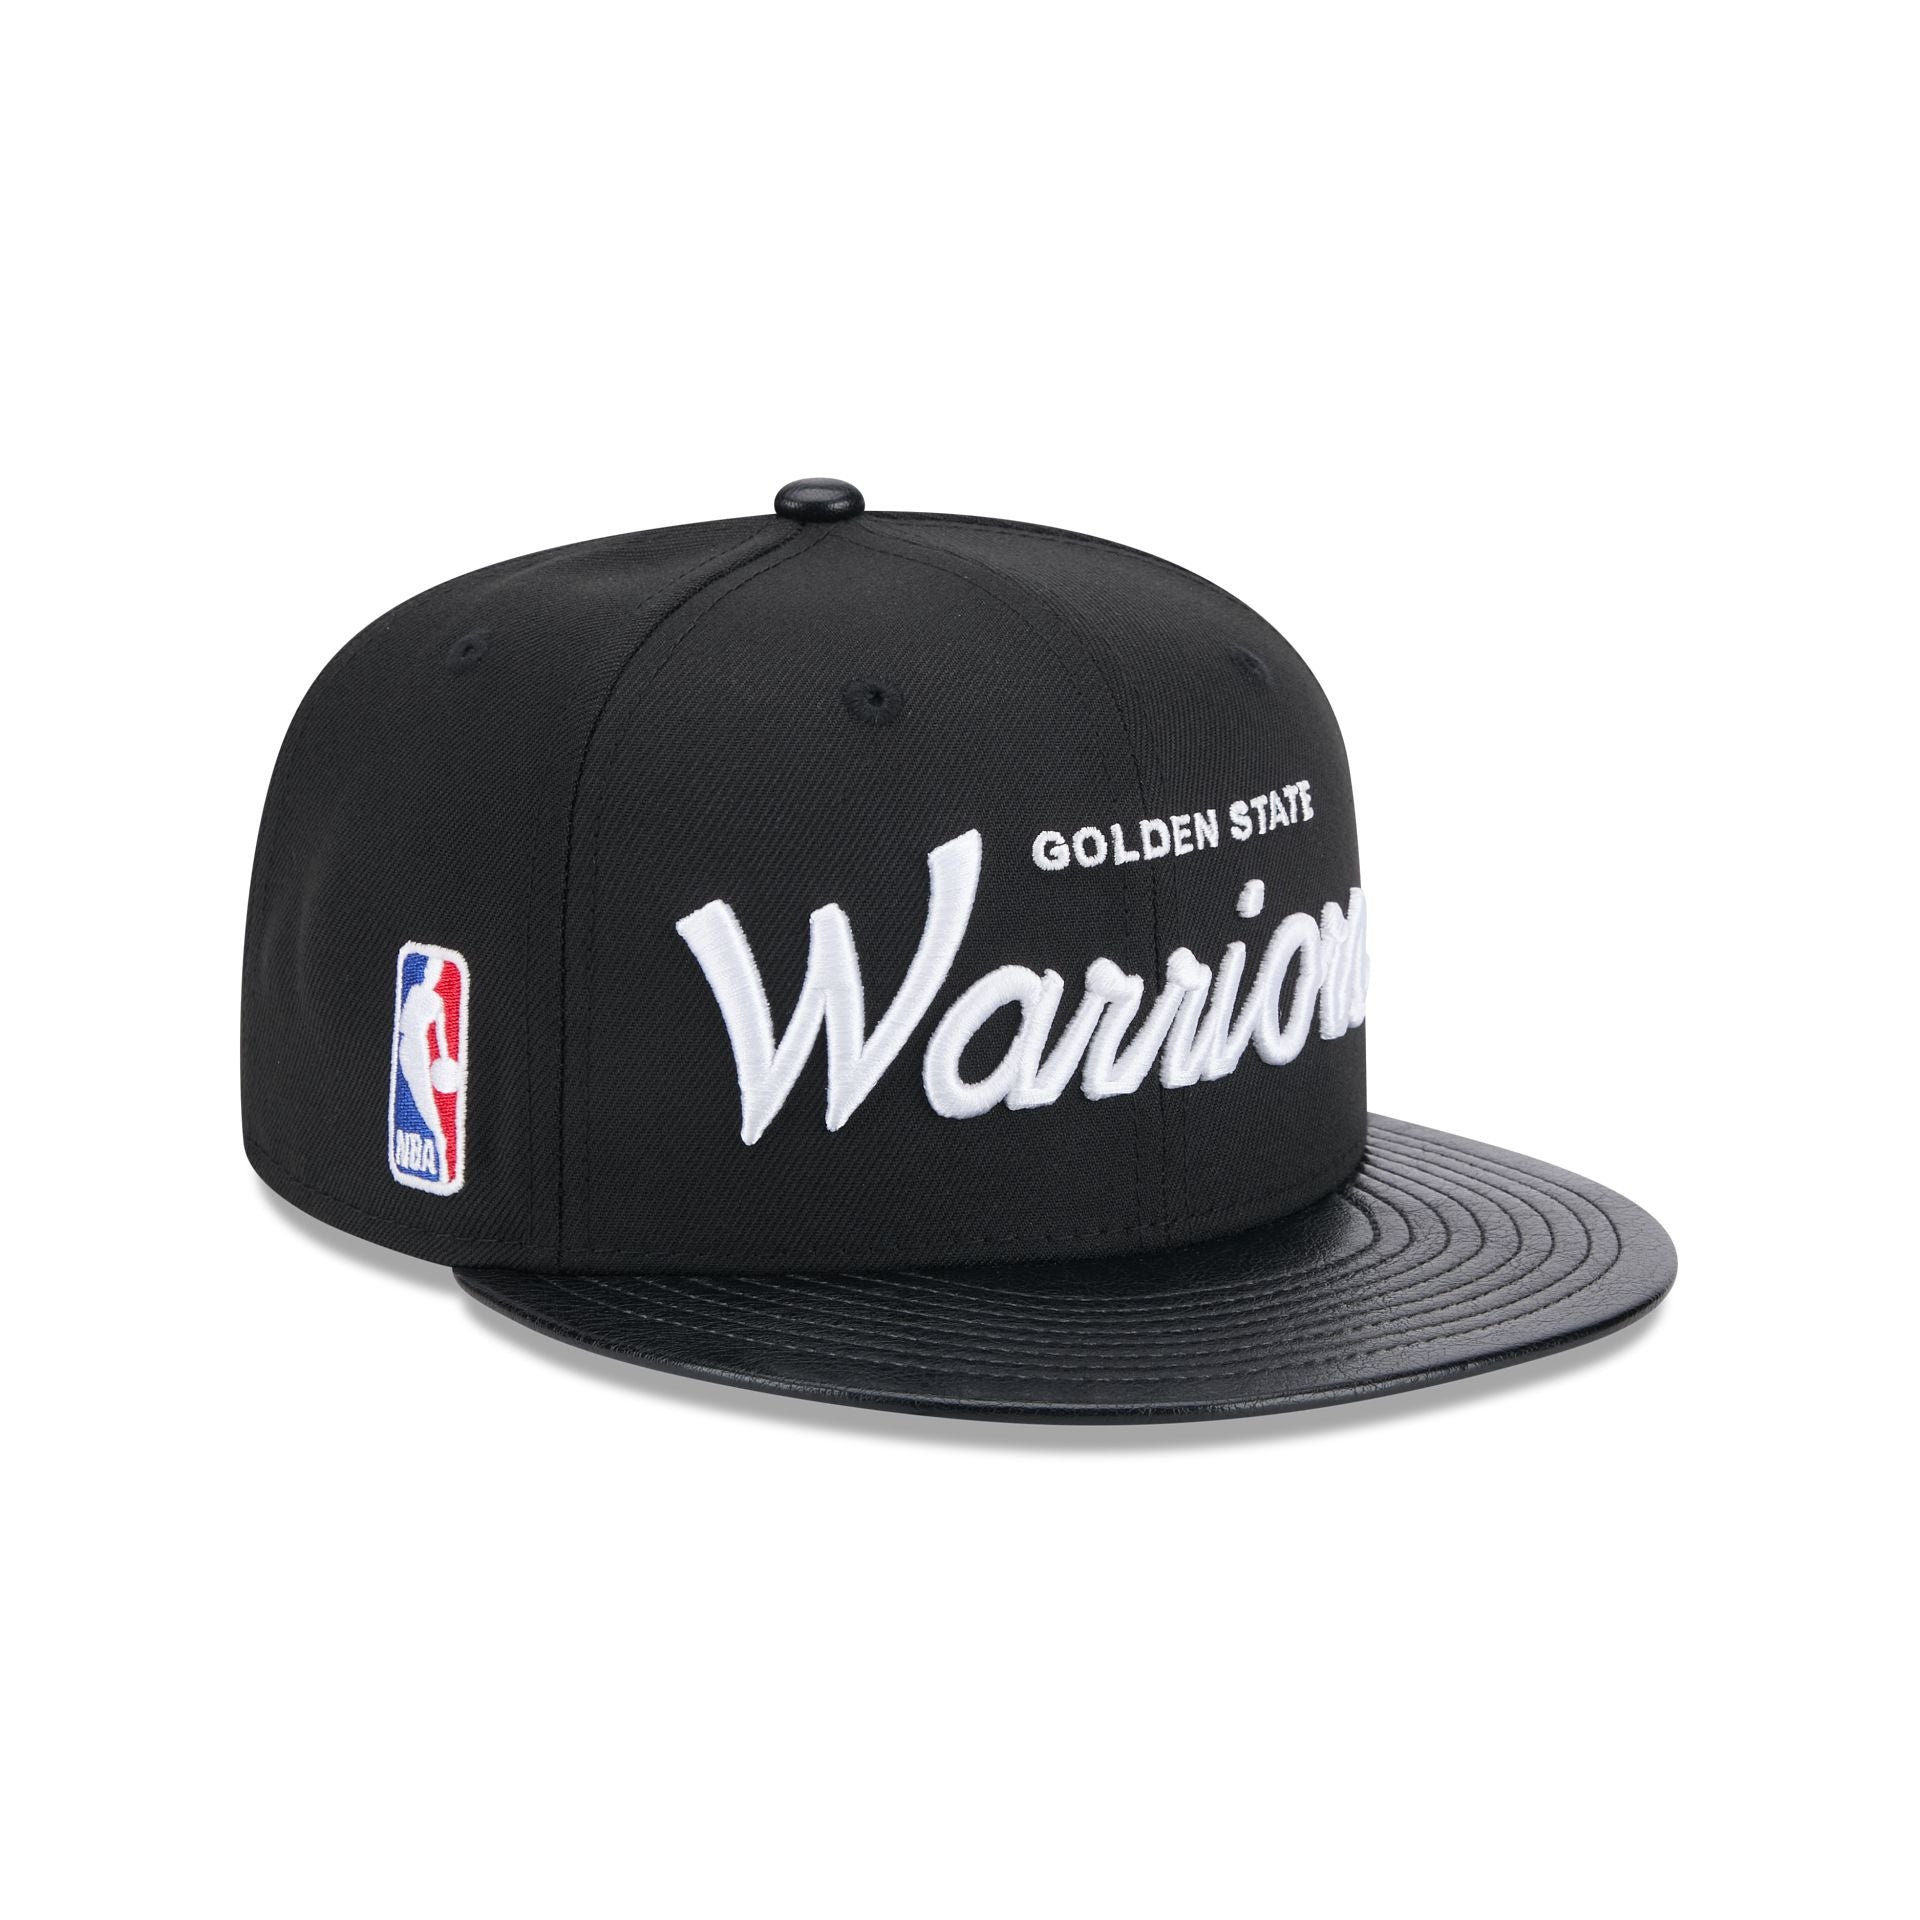 Golden State Warriors Faux Leather Visor 9FIFTY Snapback Hat – New 